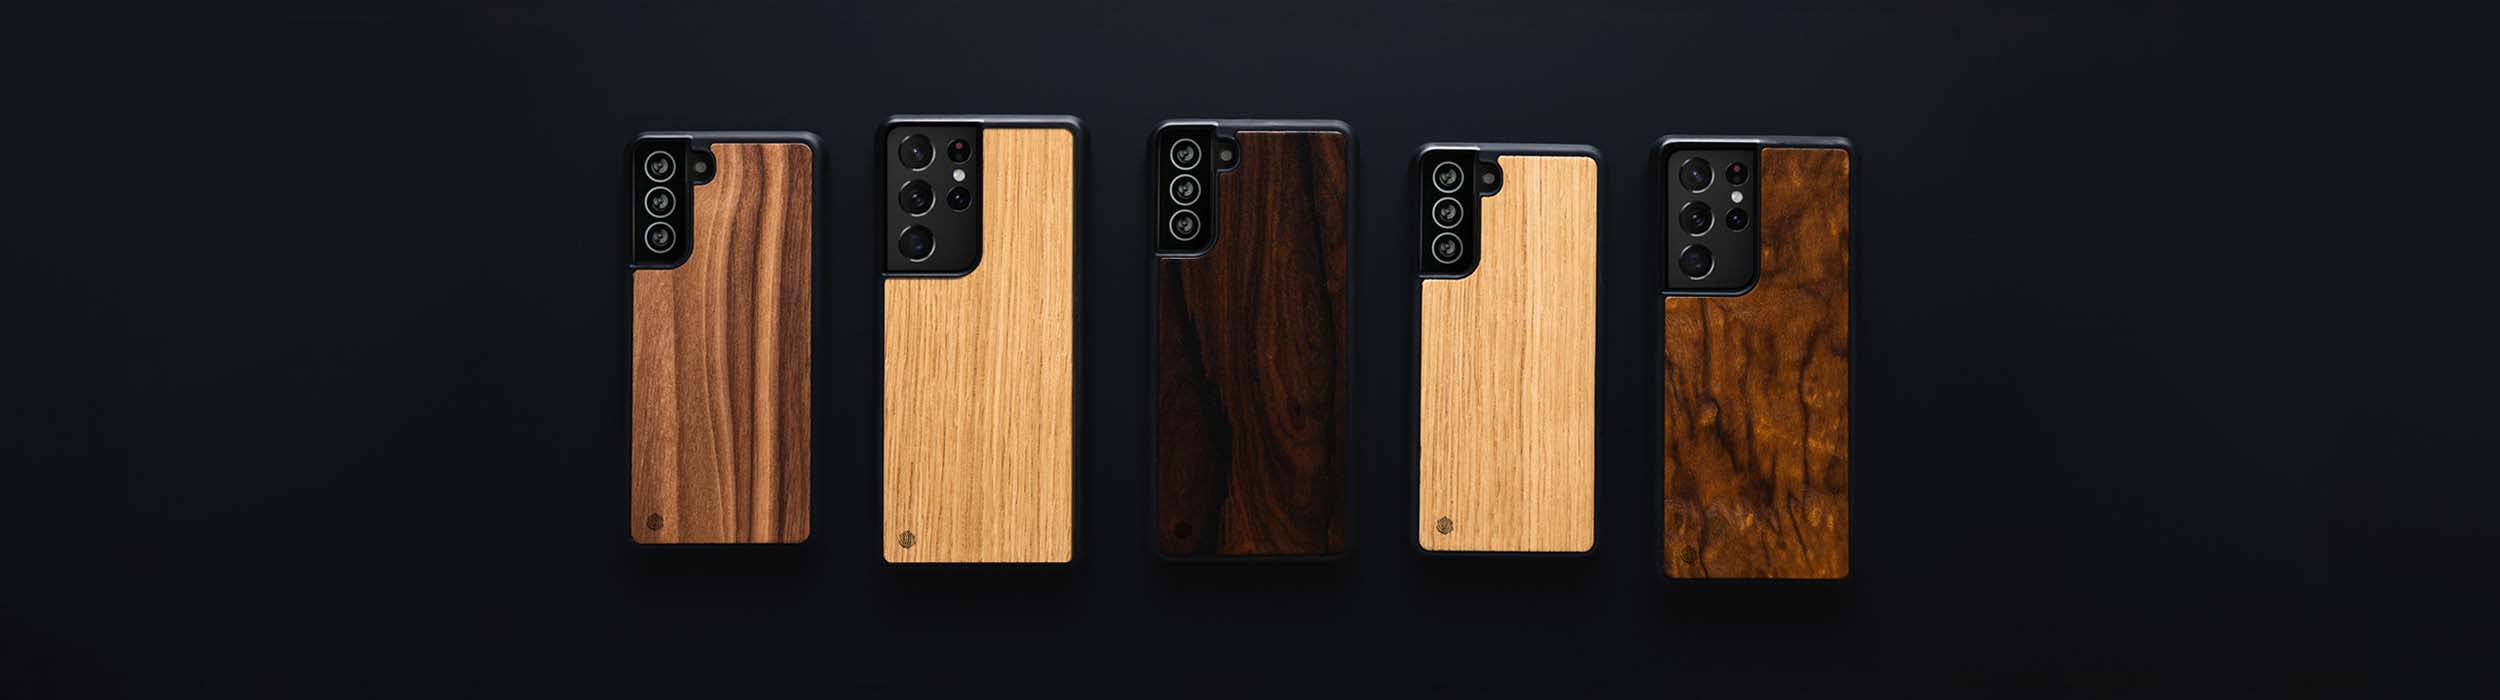 Samsung Galaxy S21 Ultra Wooden Phone Cases